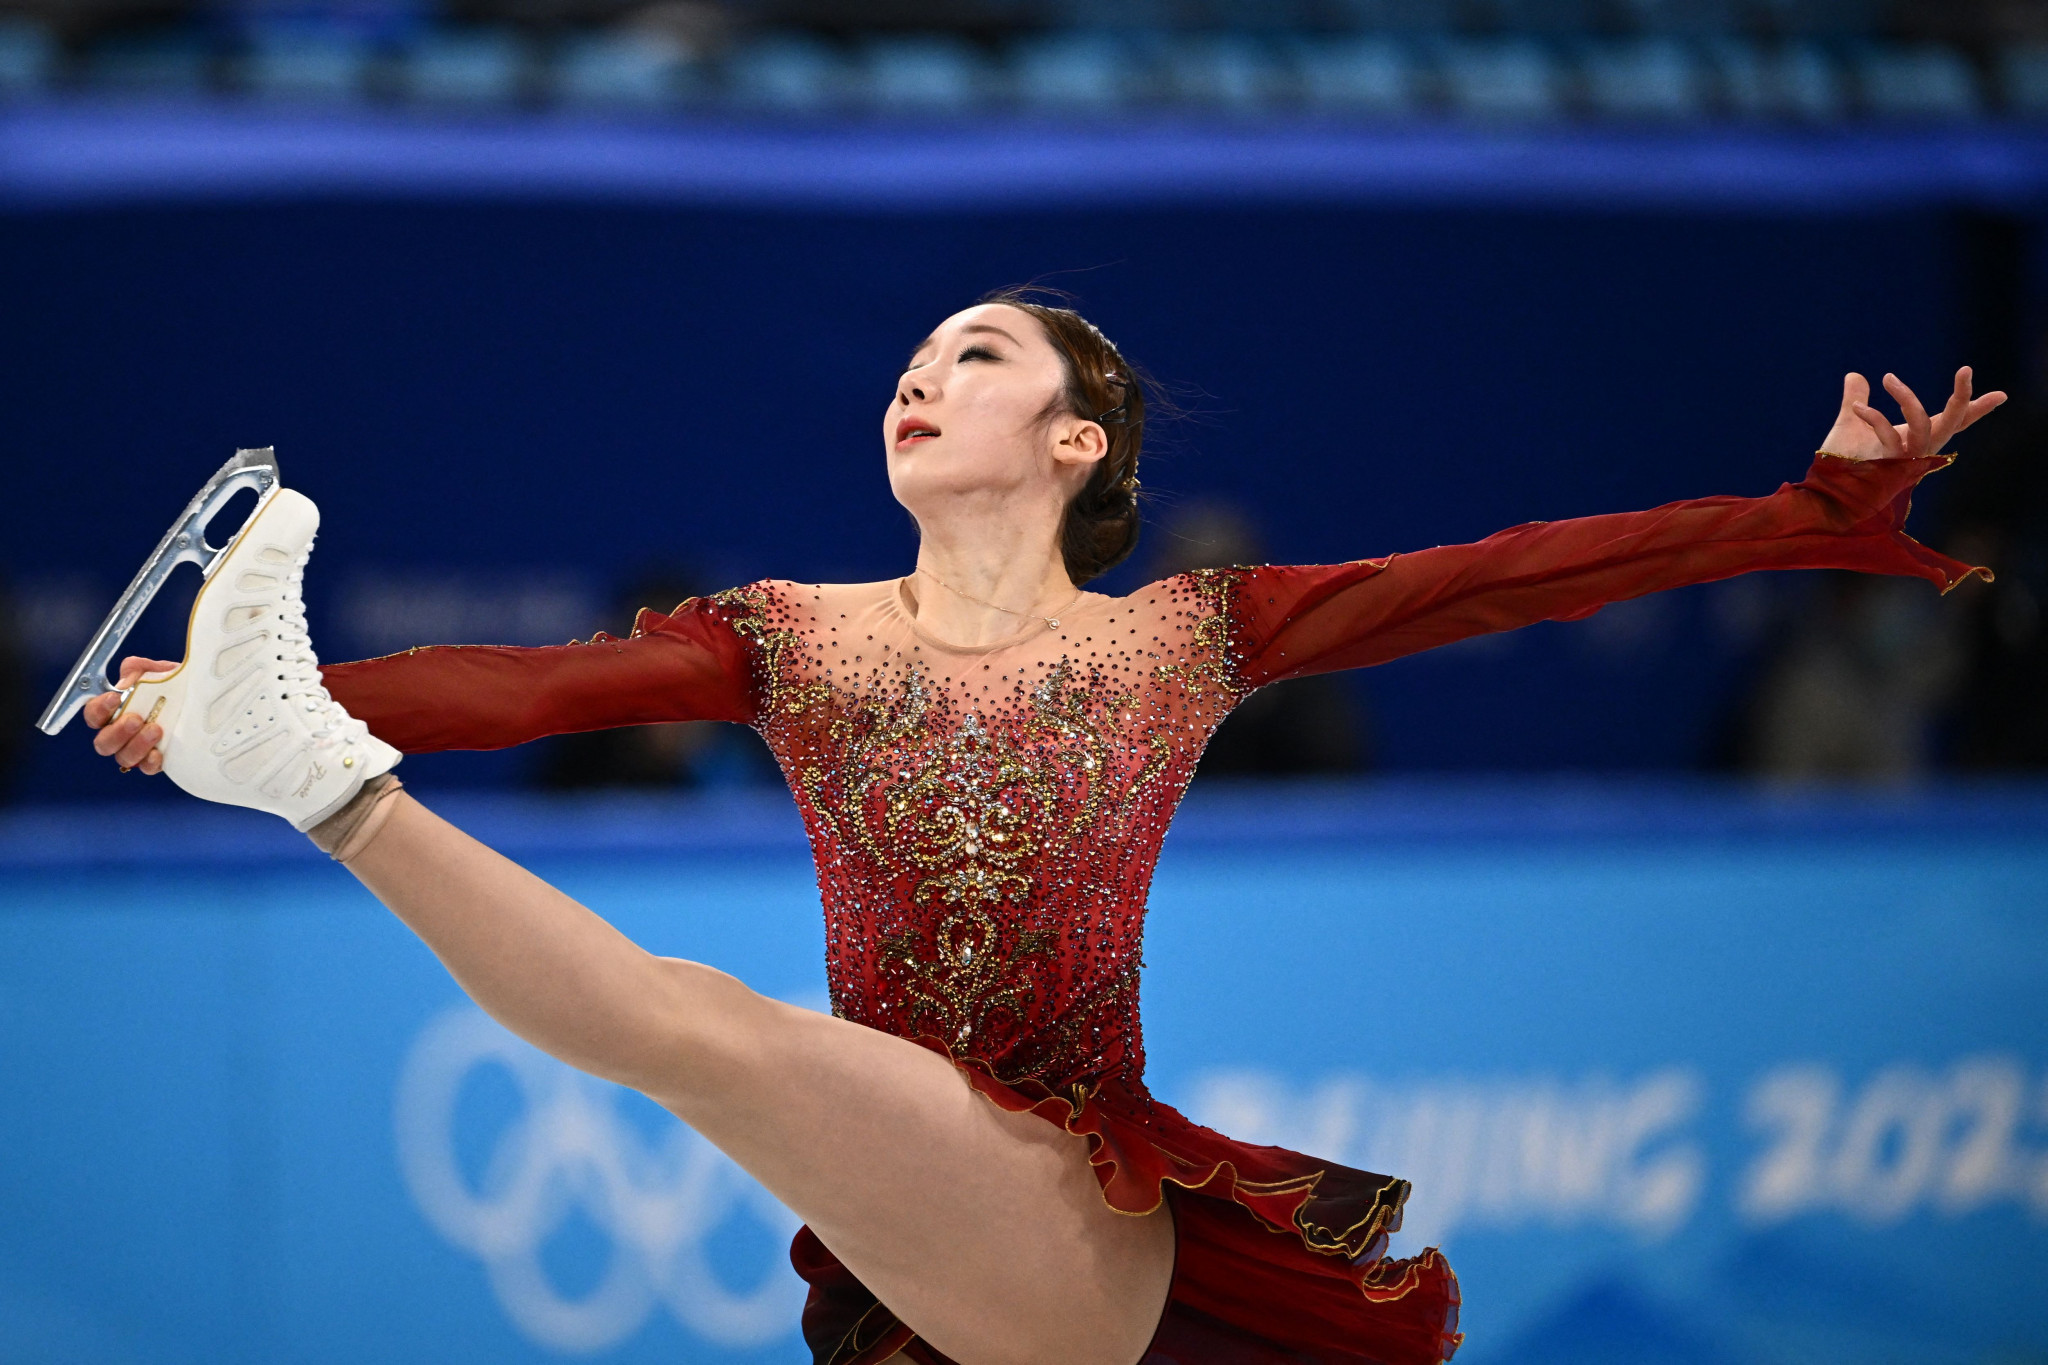 Beijing 2022 Olympic Games: Day 13 of competition